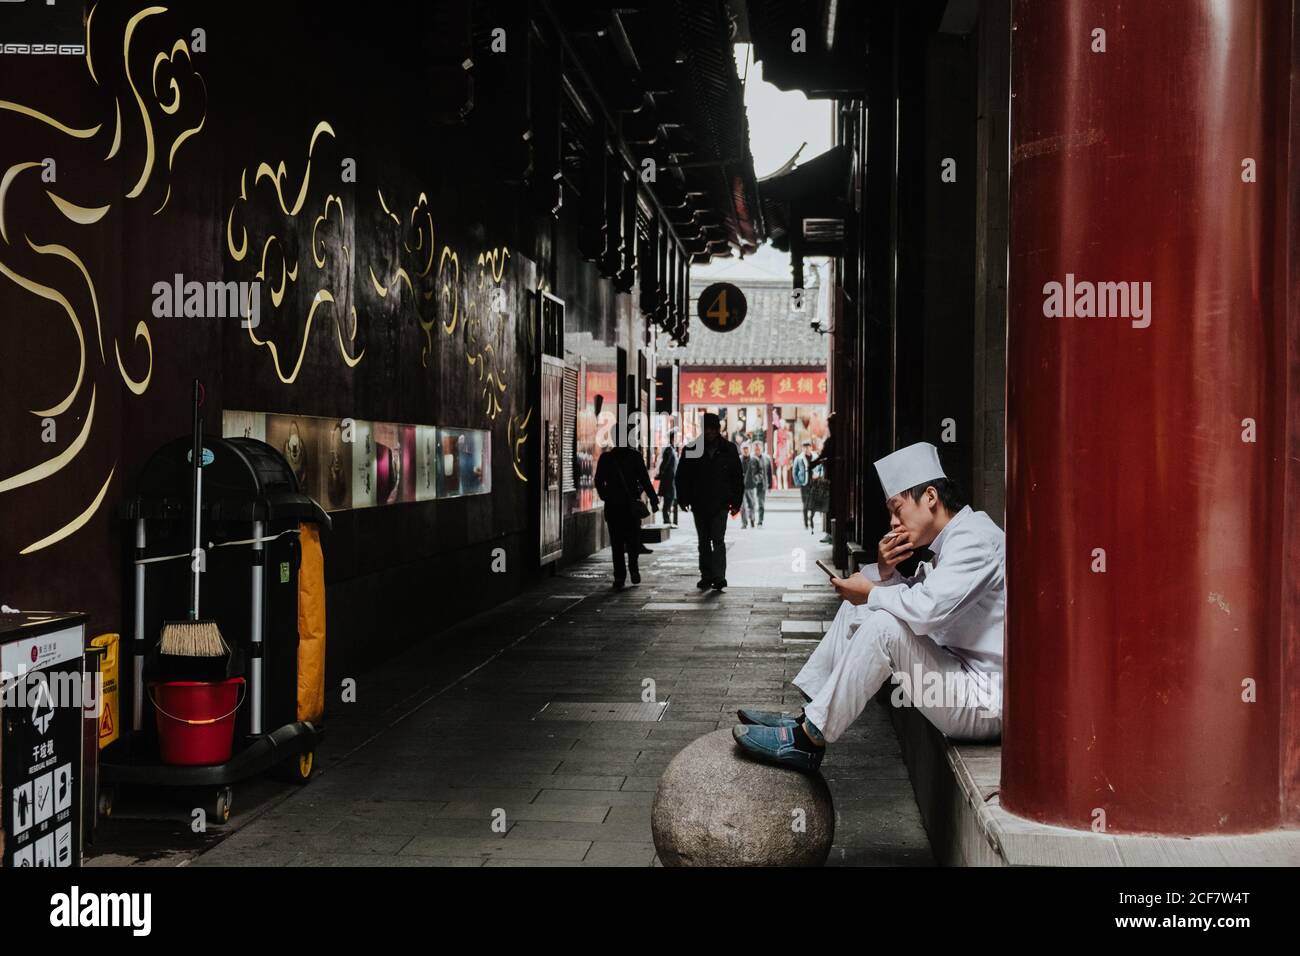 Shanghai, China - 12 December, 2018: Side view of young male in white uniform smoking and using smartphone while sitting next to building on narrow pedestrian street Stock Photo